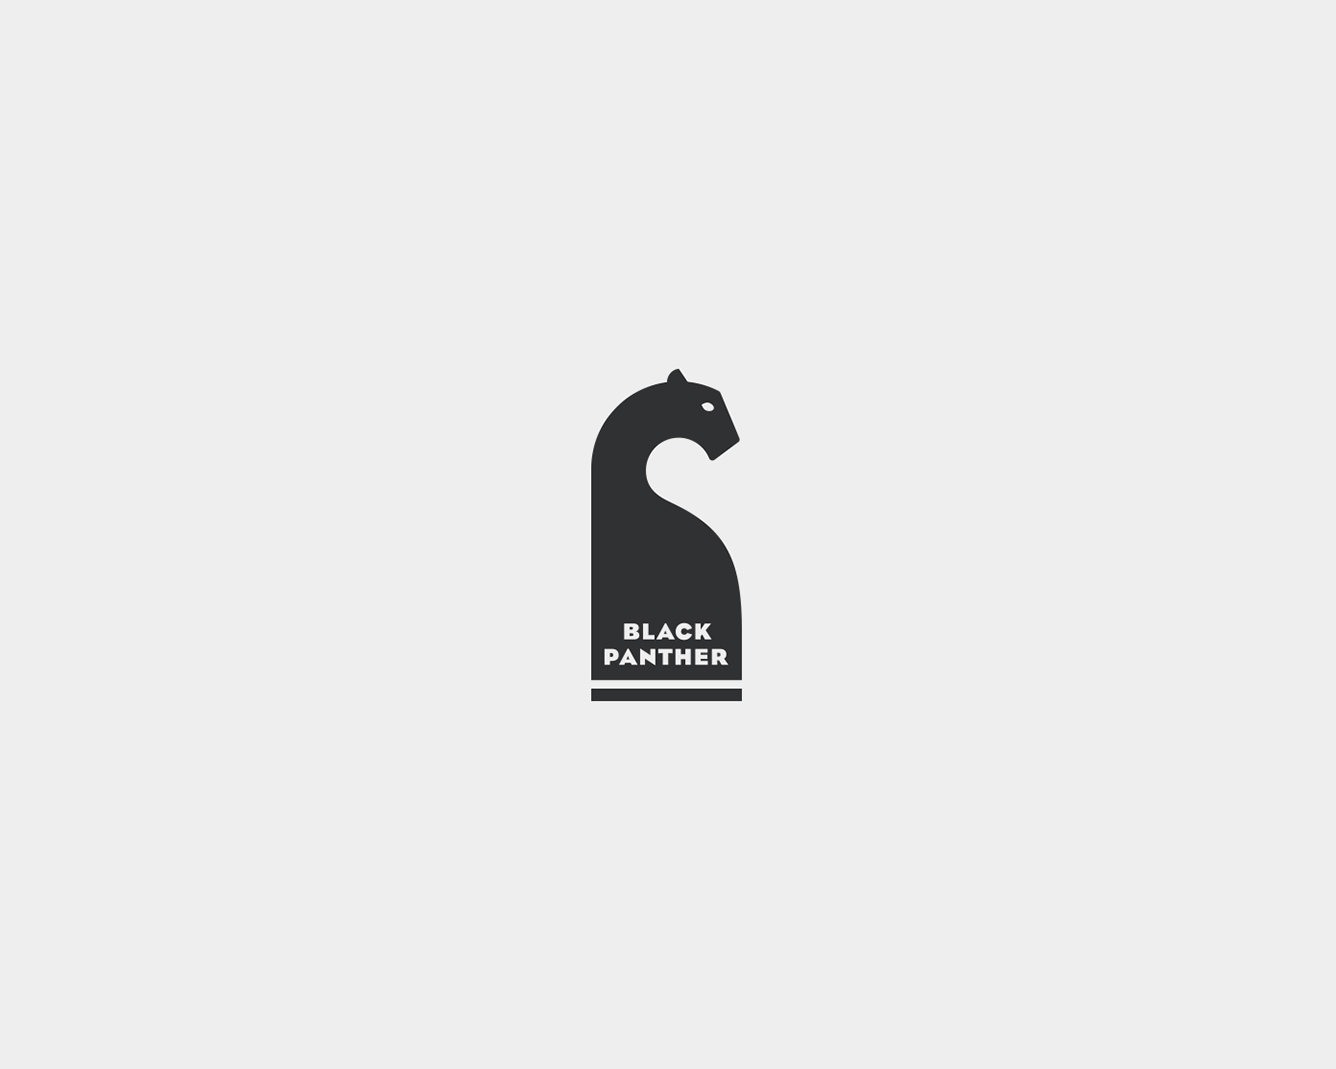 Designer creates logos with hidden meanings - 6